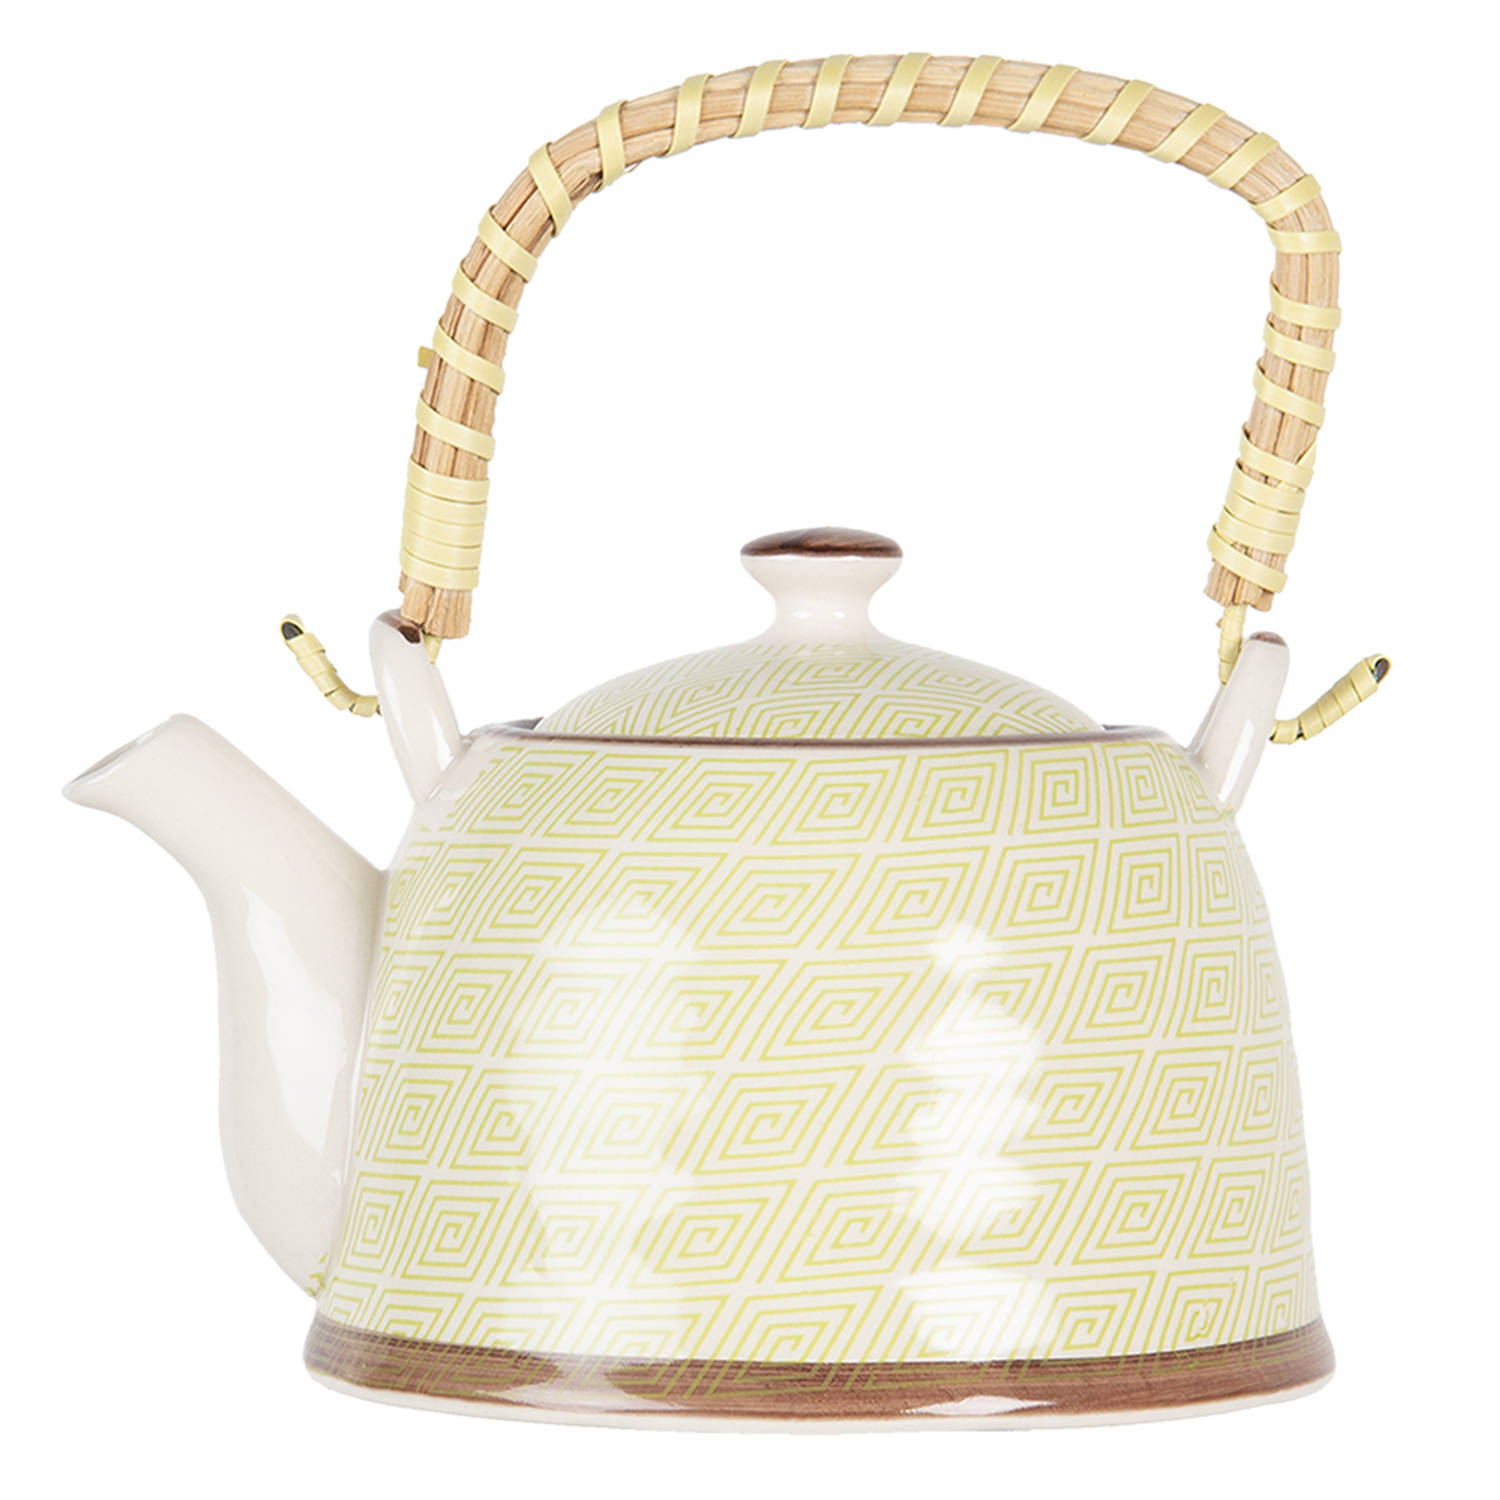 HAES DECO - Chinese Theepot - Porselein - Fantasie Patroon - Theepot 700 ml - Traditioneel Theeservies, Theekan